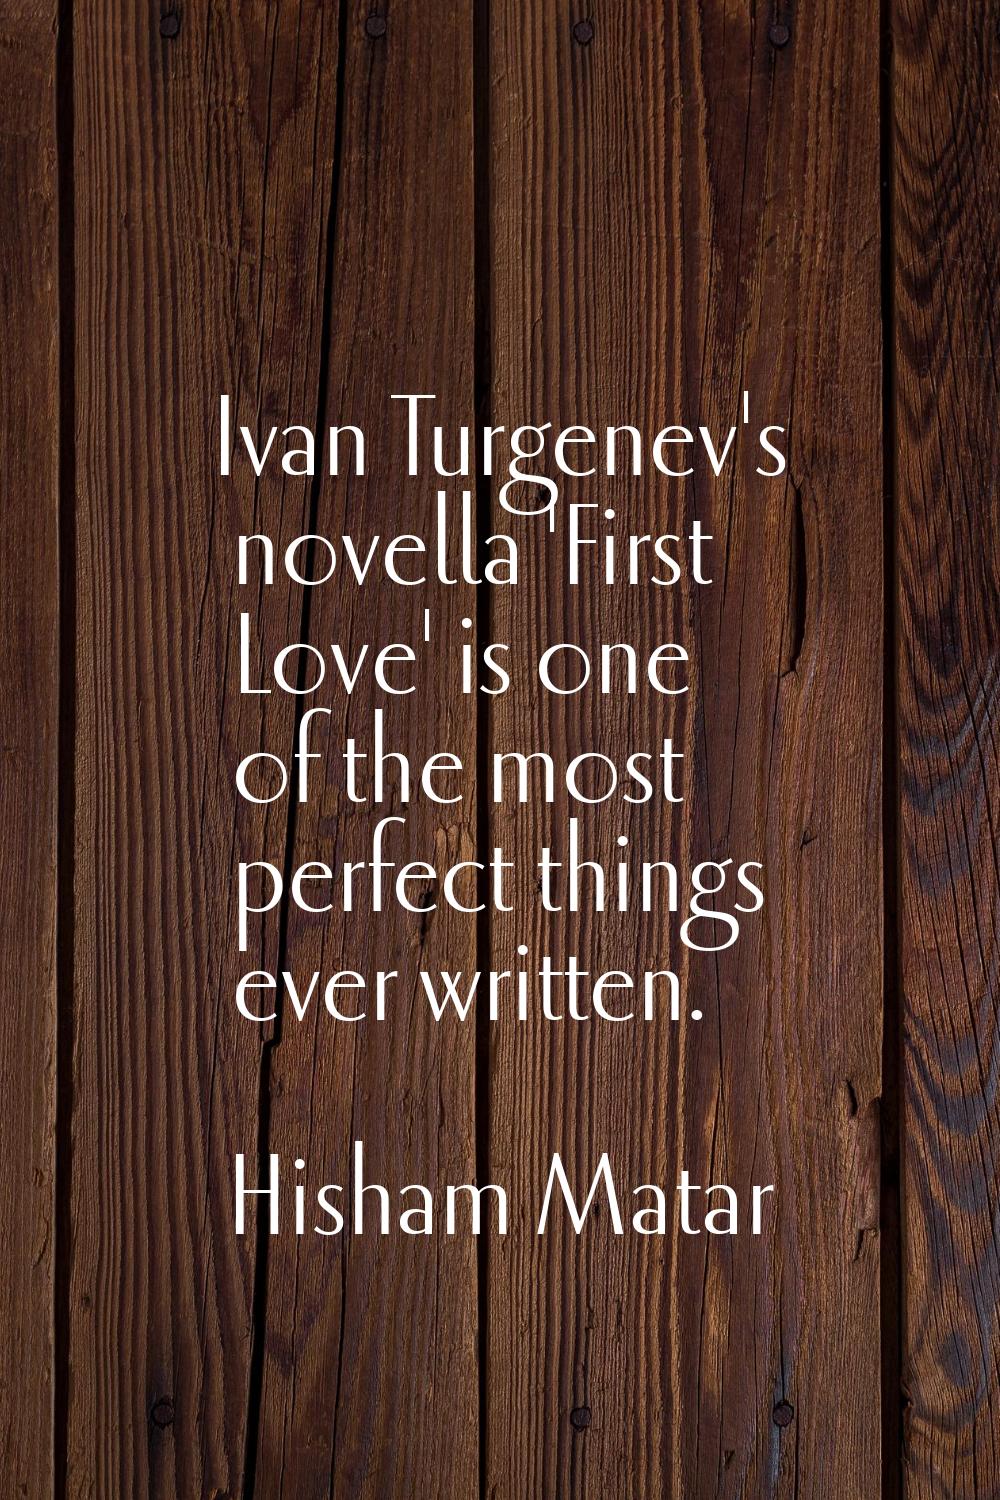 Ivan Turgenev's novella 'First Love' is one of the most perfect things ever written.